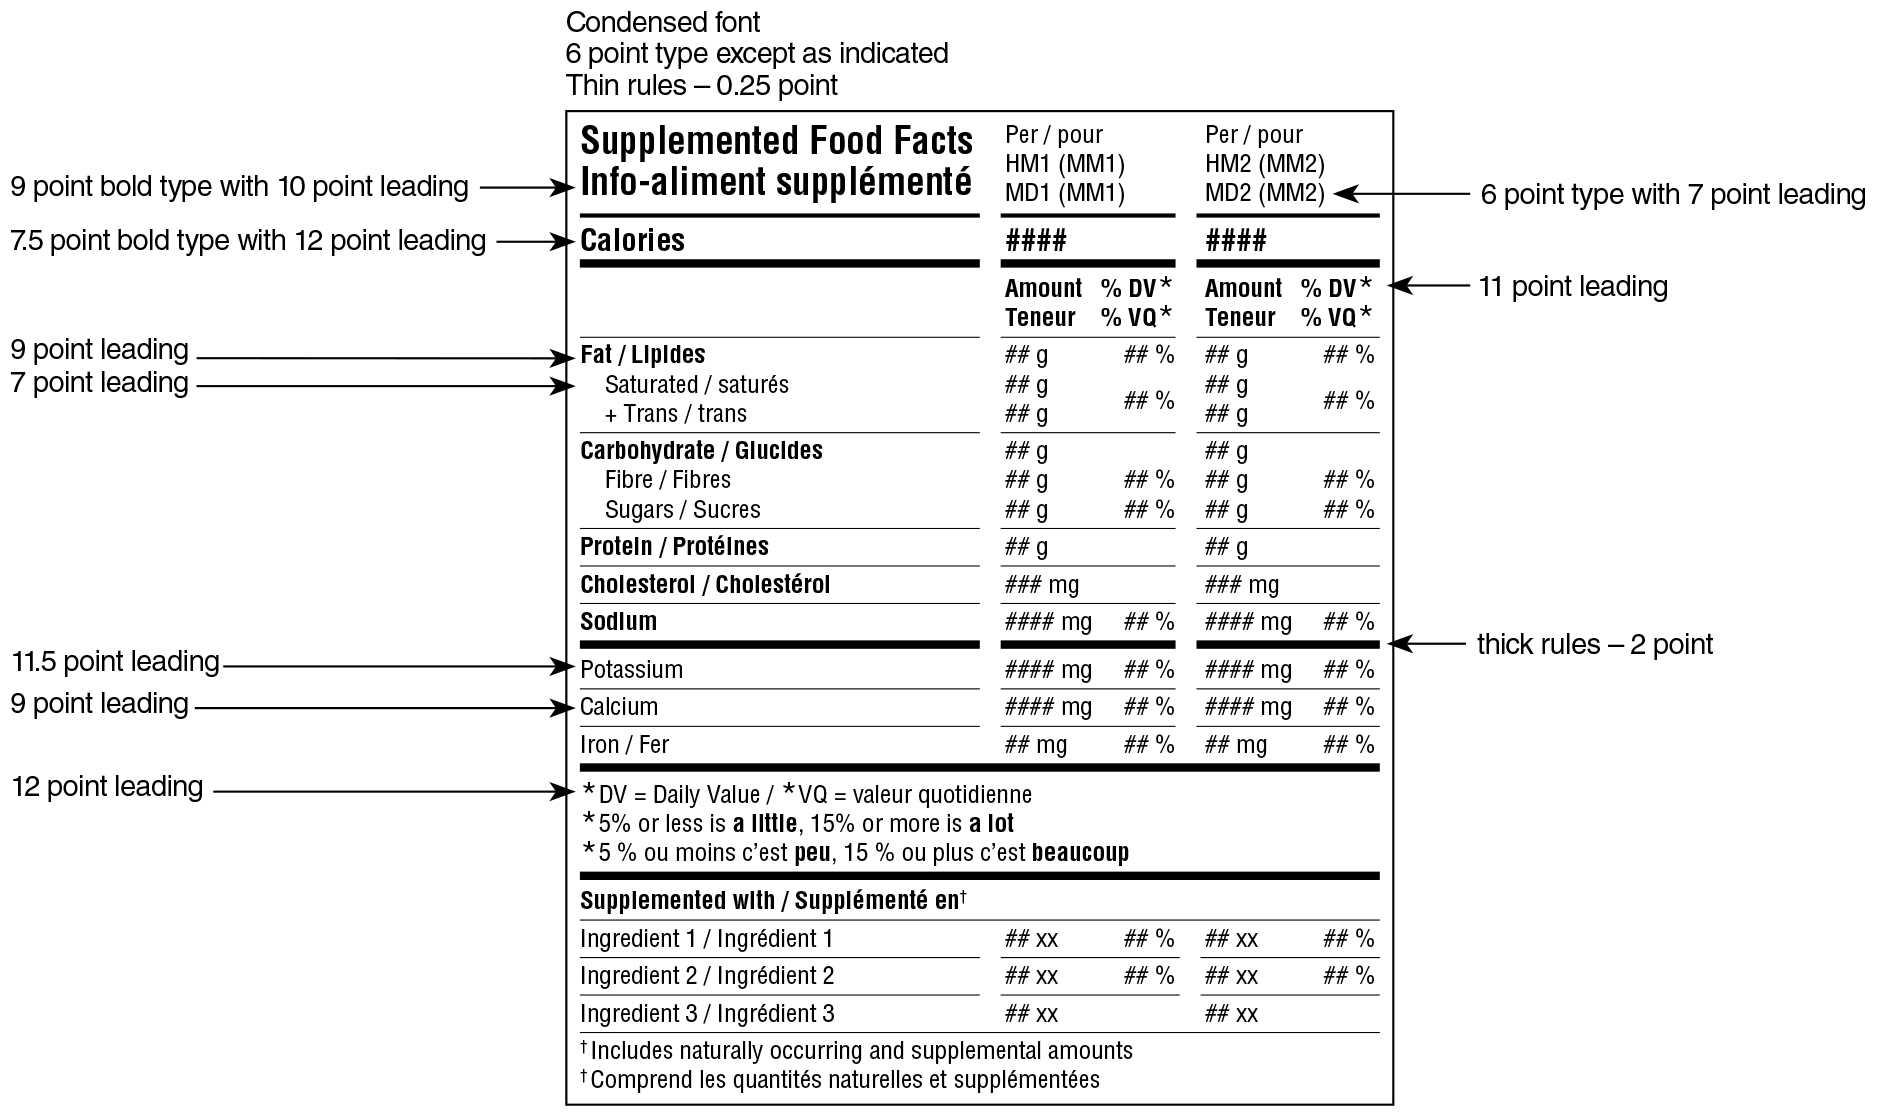 A bilingual Supplemented Food Facts table in aggregate format for two serving sizes surrounded by specifications. Text version below.